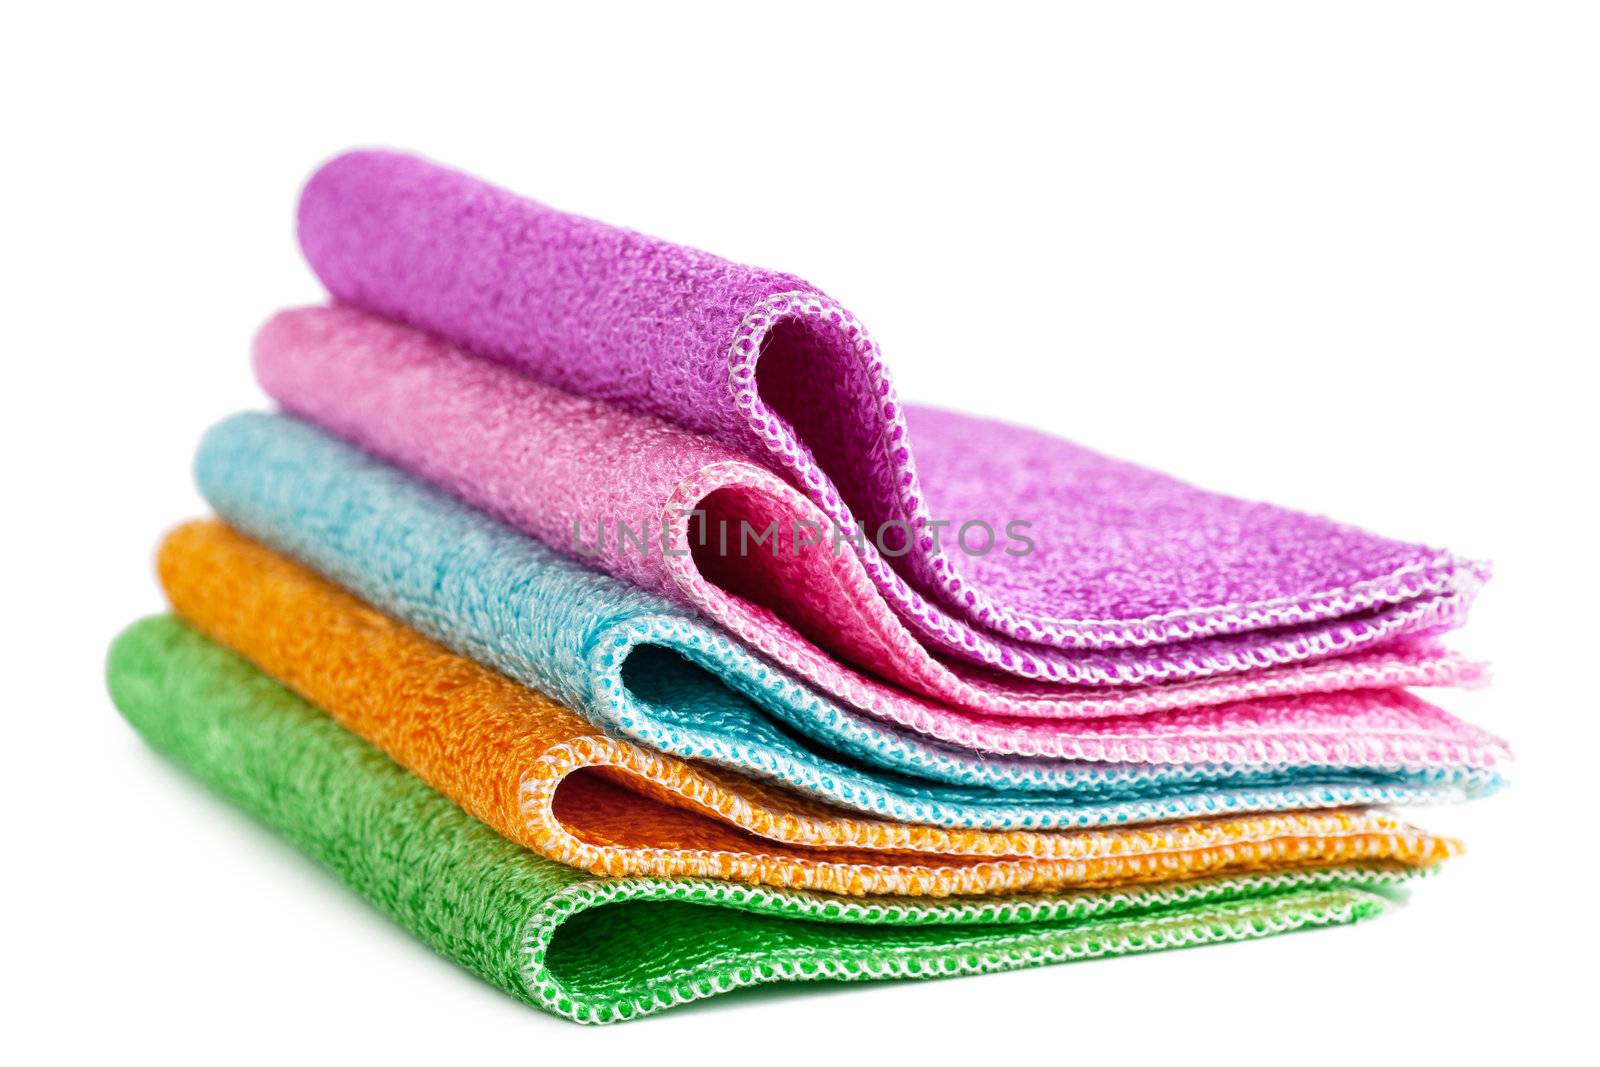 Closeup view of pile of colorful cleaning rags